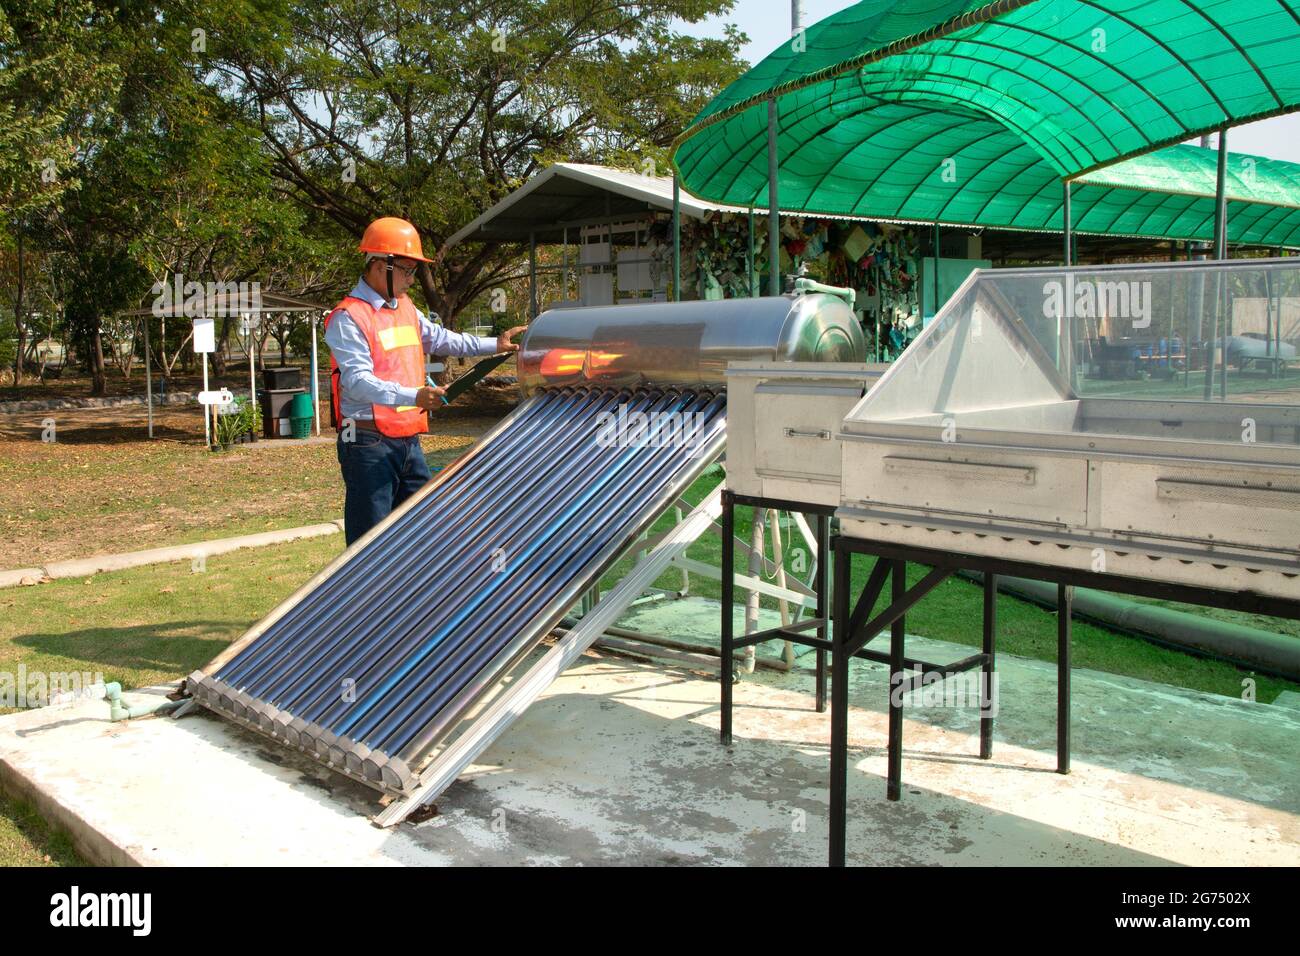 The Asian worker in uniform and helmet checks concentrating Solar Power with Flat Plat collector and Evacuum Tube Collector. Stock Photo